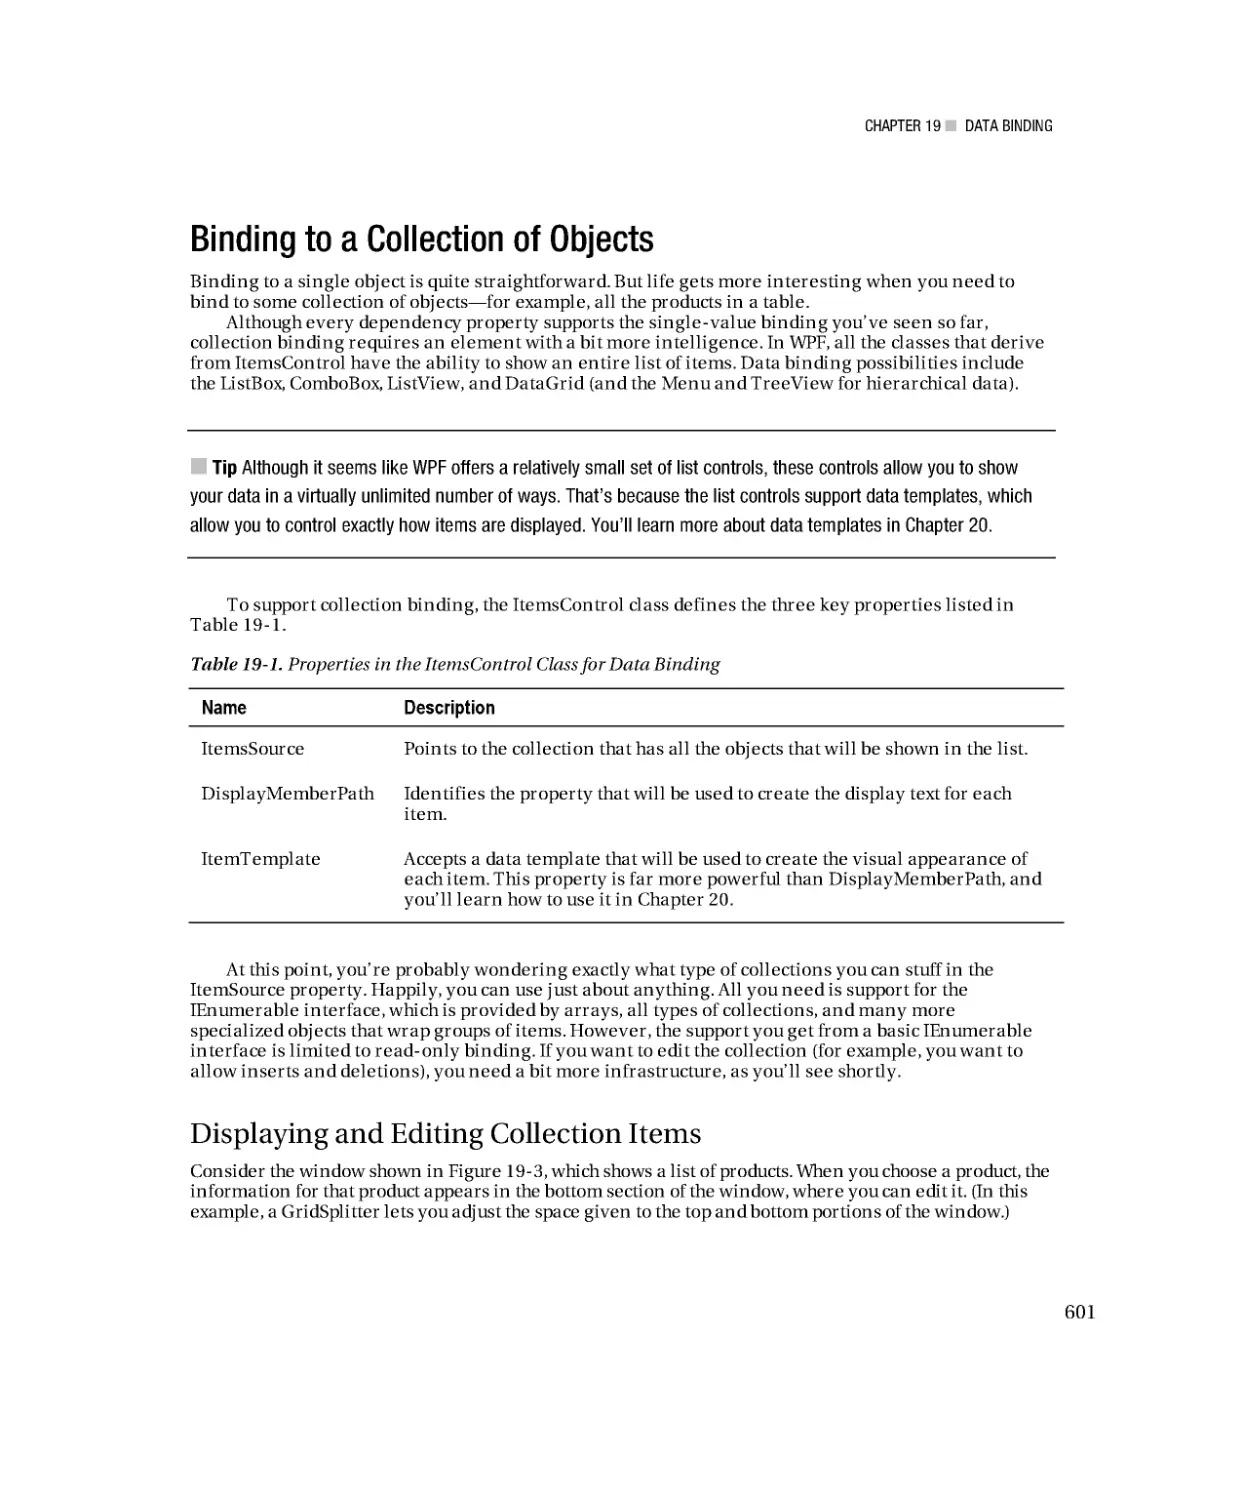 Binding to a Collection of Objects